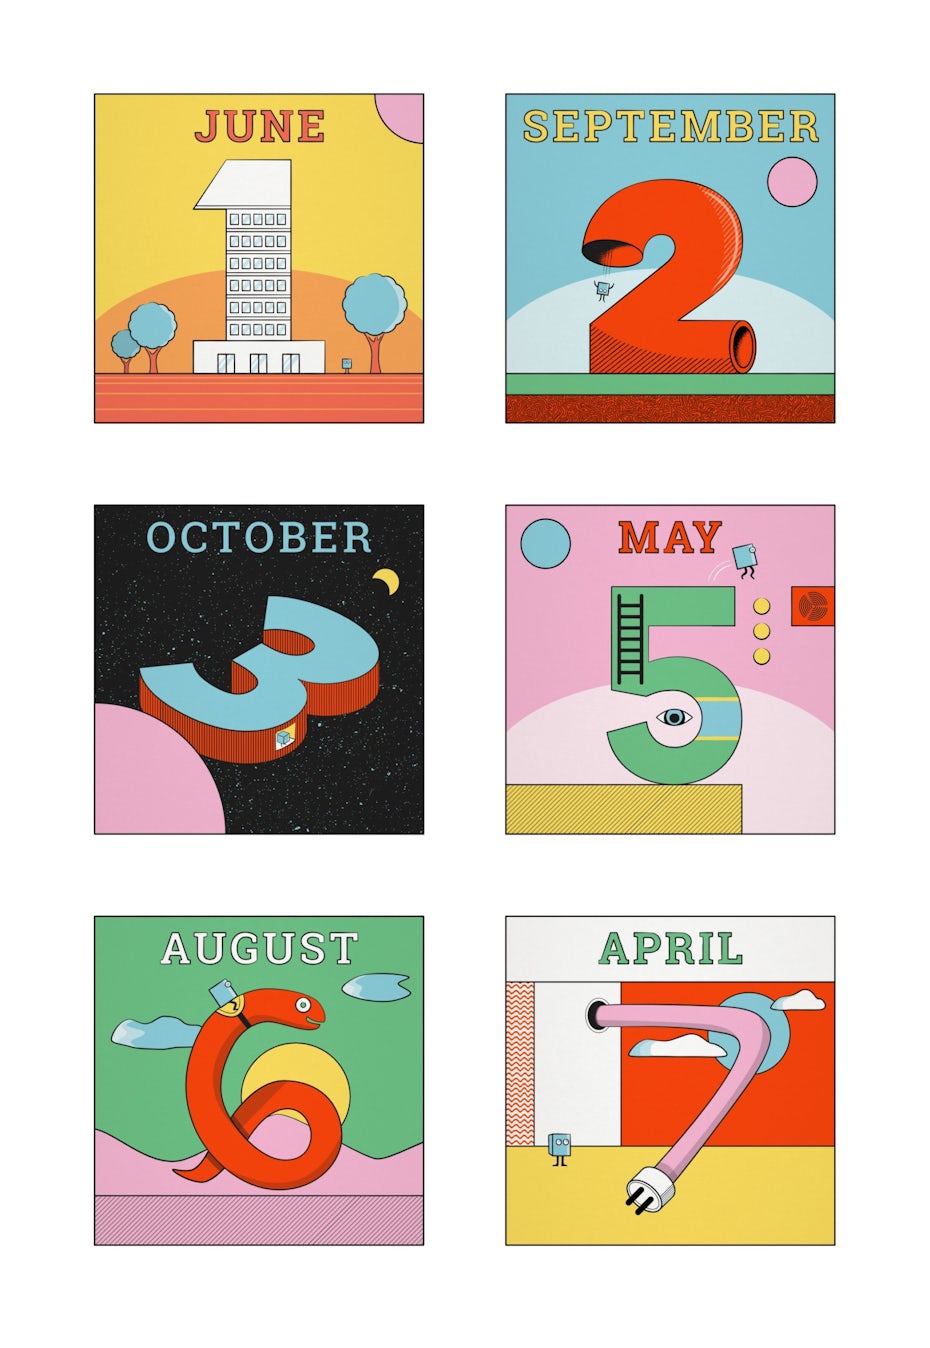 calendar illustrations of large numbers in vintage colors